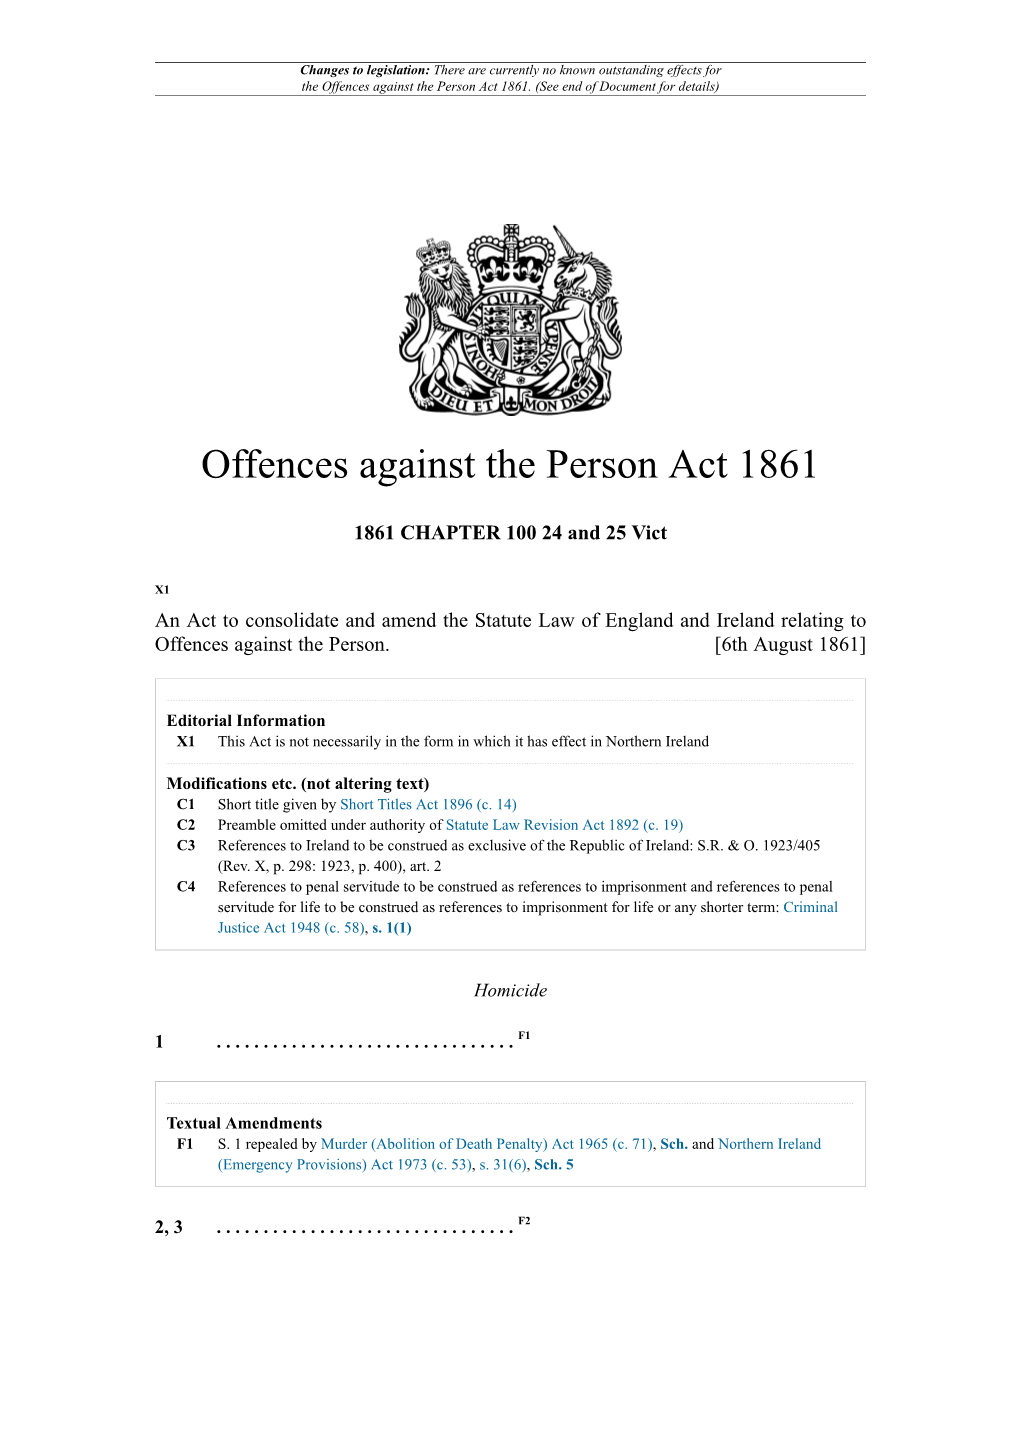 Offences Against the Person Act 1861